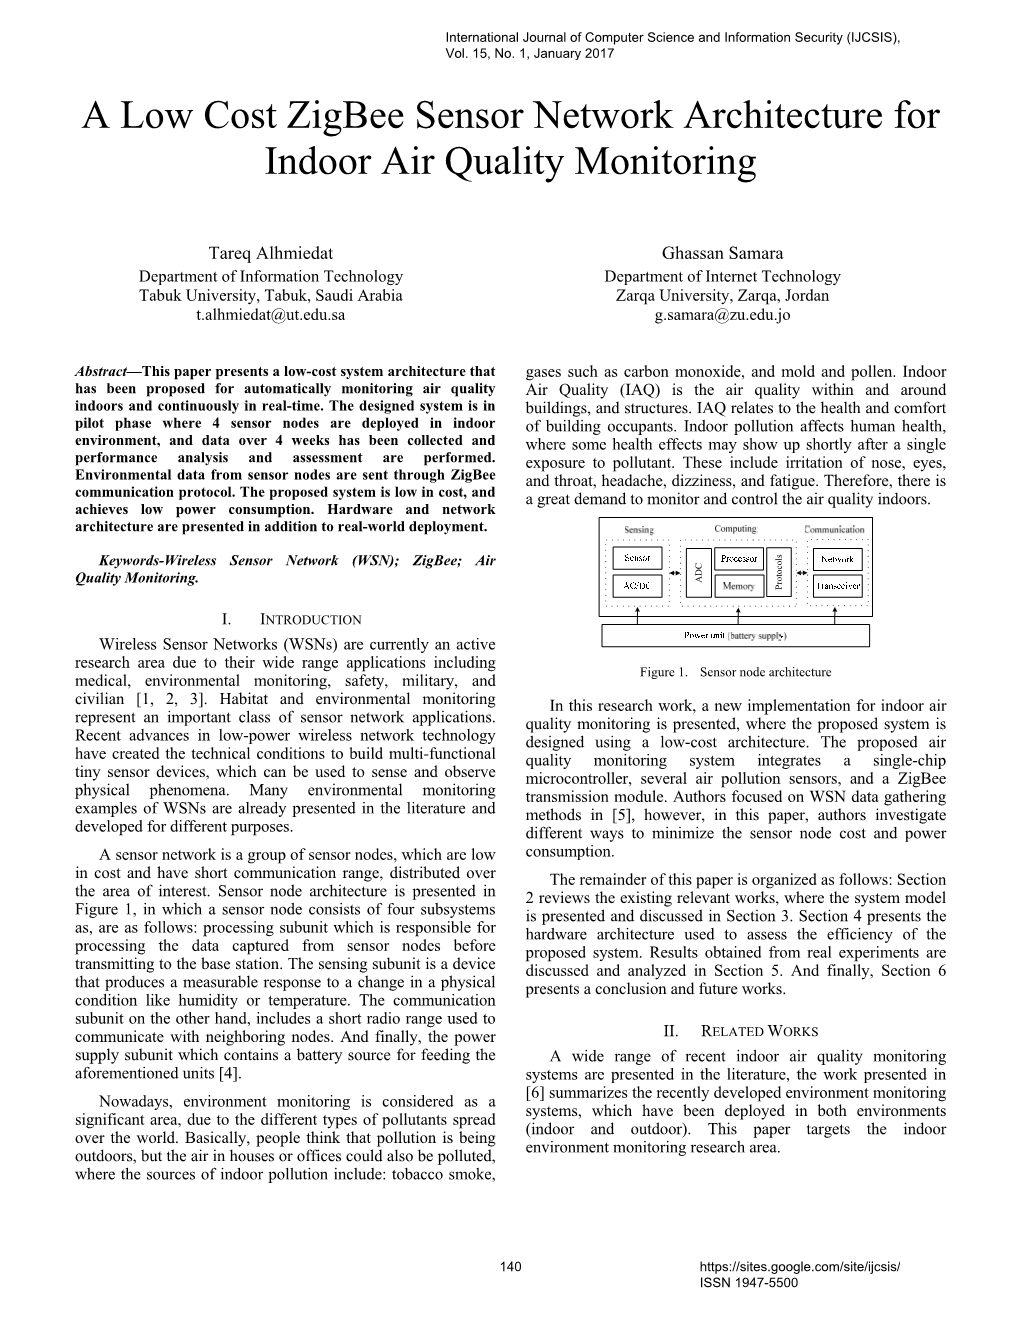 A Low Cost Zigbee Sensor Network Architecture for Indoor Air Quality Monitoring